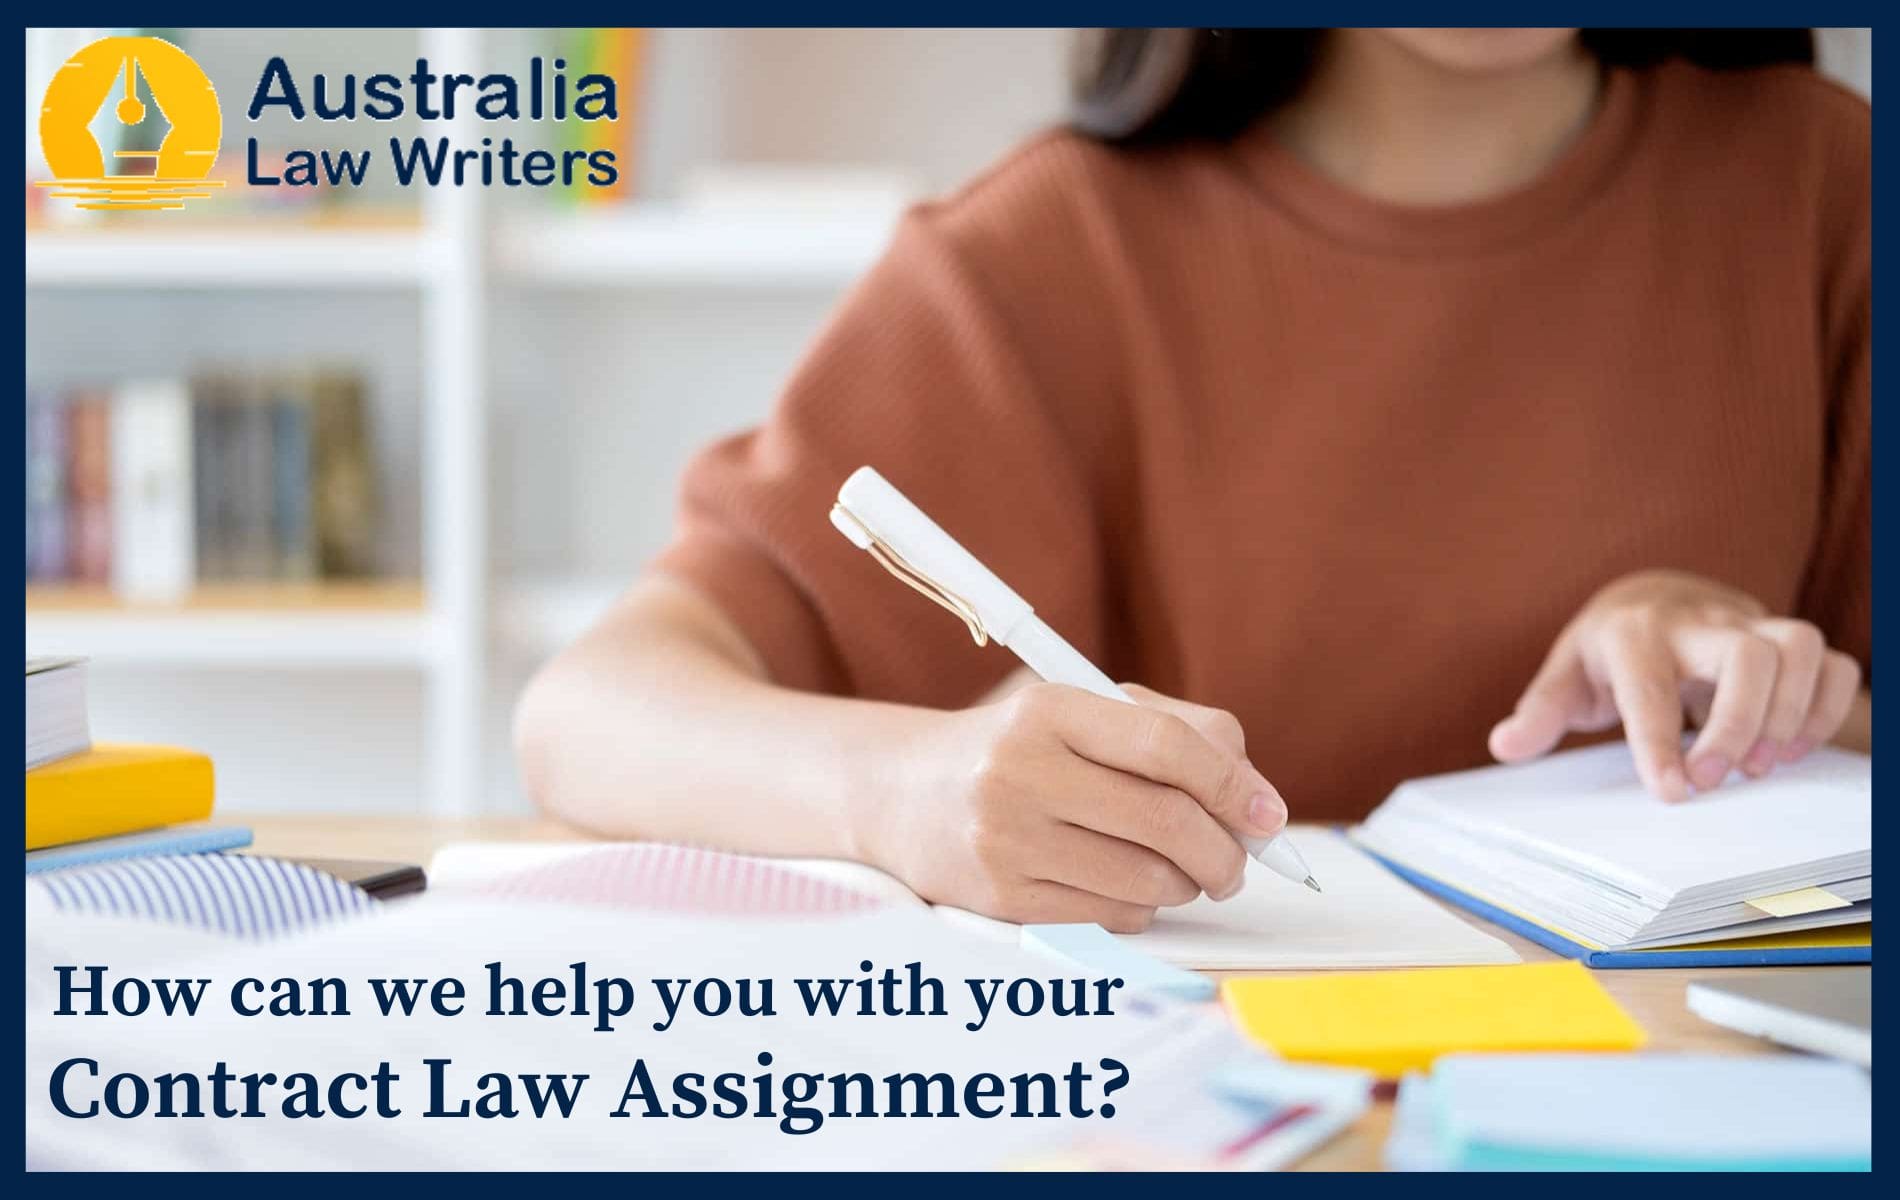 How can we help you with your Contract Law Assignment?